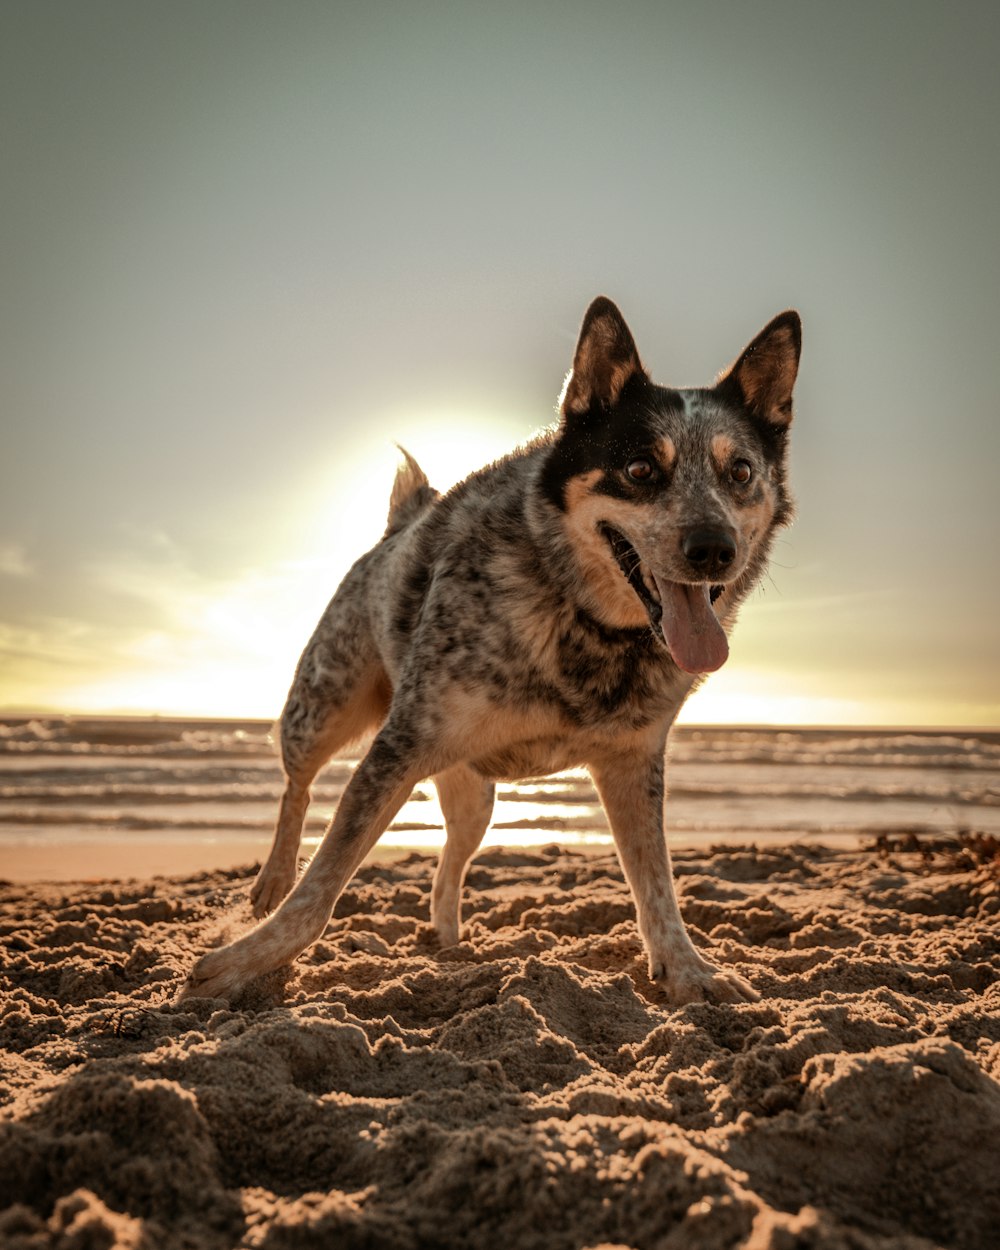 a dog running on a beach with the sun in the background